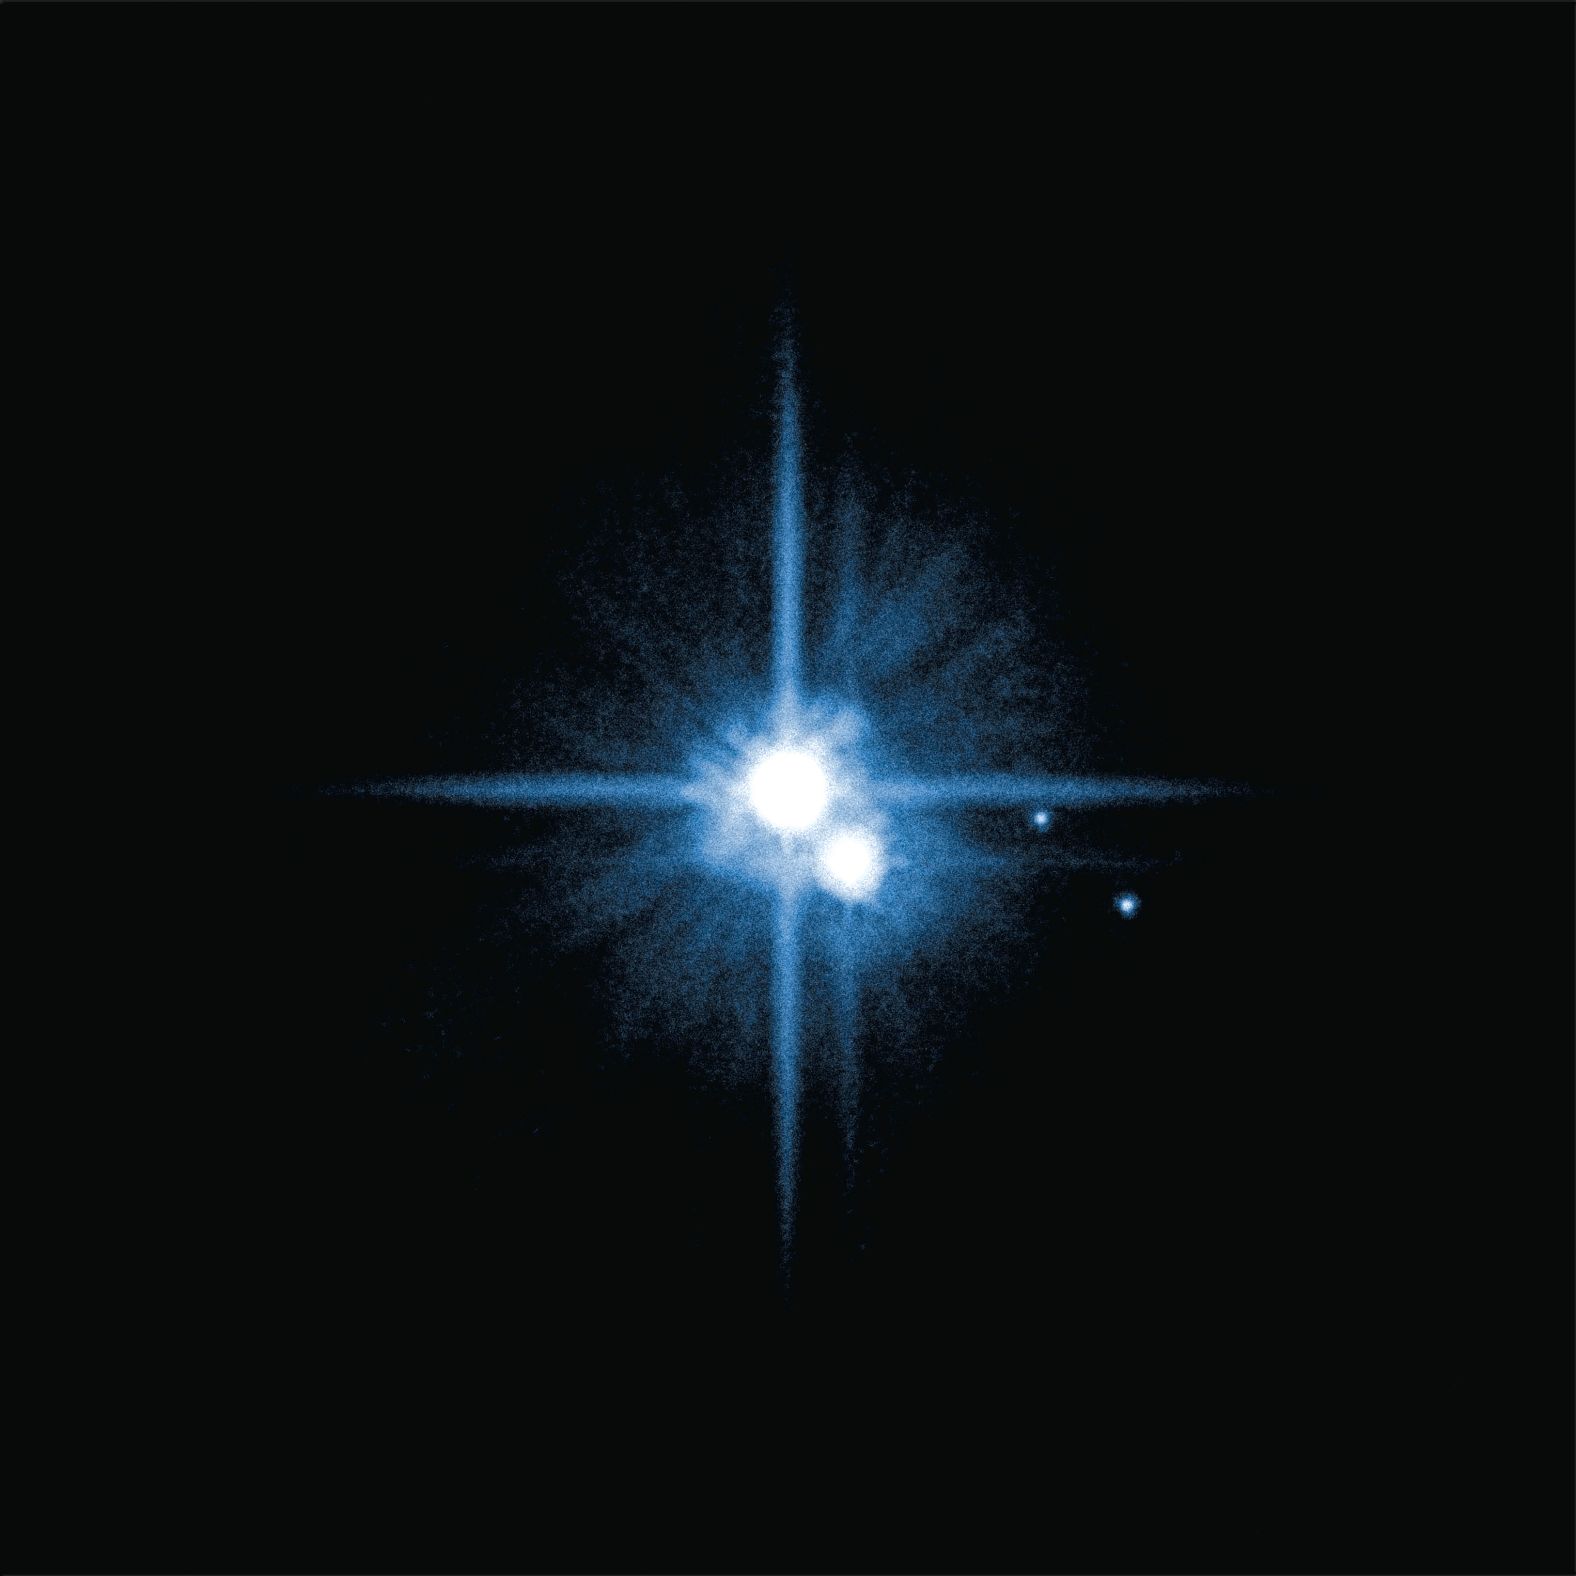 Hubble discovered four of Pluto's five moons. In 2005: Nix and Hydra were found. Hubble discovered Kerberos in 2011 and Styx in 2012. The new discoveries joined Pluto's large moon, Charon, which was discovered in 1978. Styx was found by scientists using Hubble to search for potential hazards for the New Horizons spacecraft which flew by Pluto in July 2015. Pluto is about 2.9 billion miles from Earth.